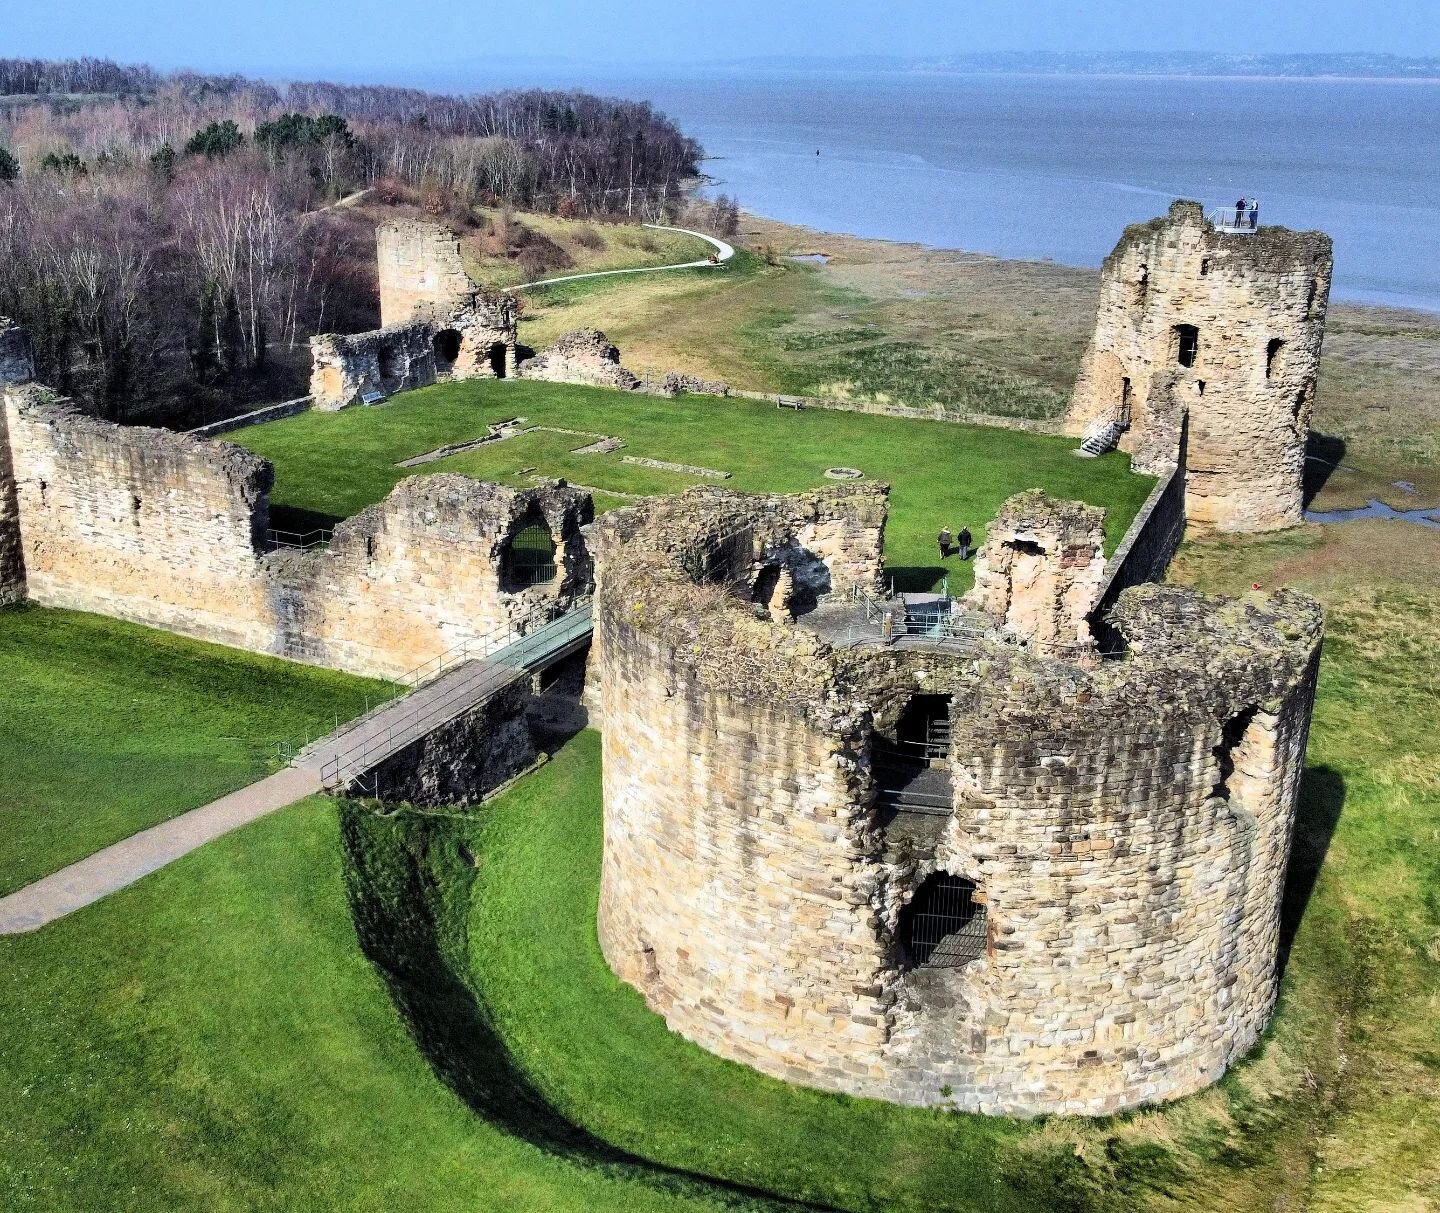 Good evening castle crawlers! 
Fflint castle is up and waiting for you on the website!
If you're looking for something to do in North Wales, check this one out!